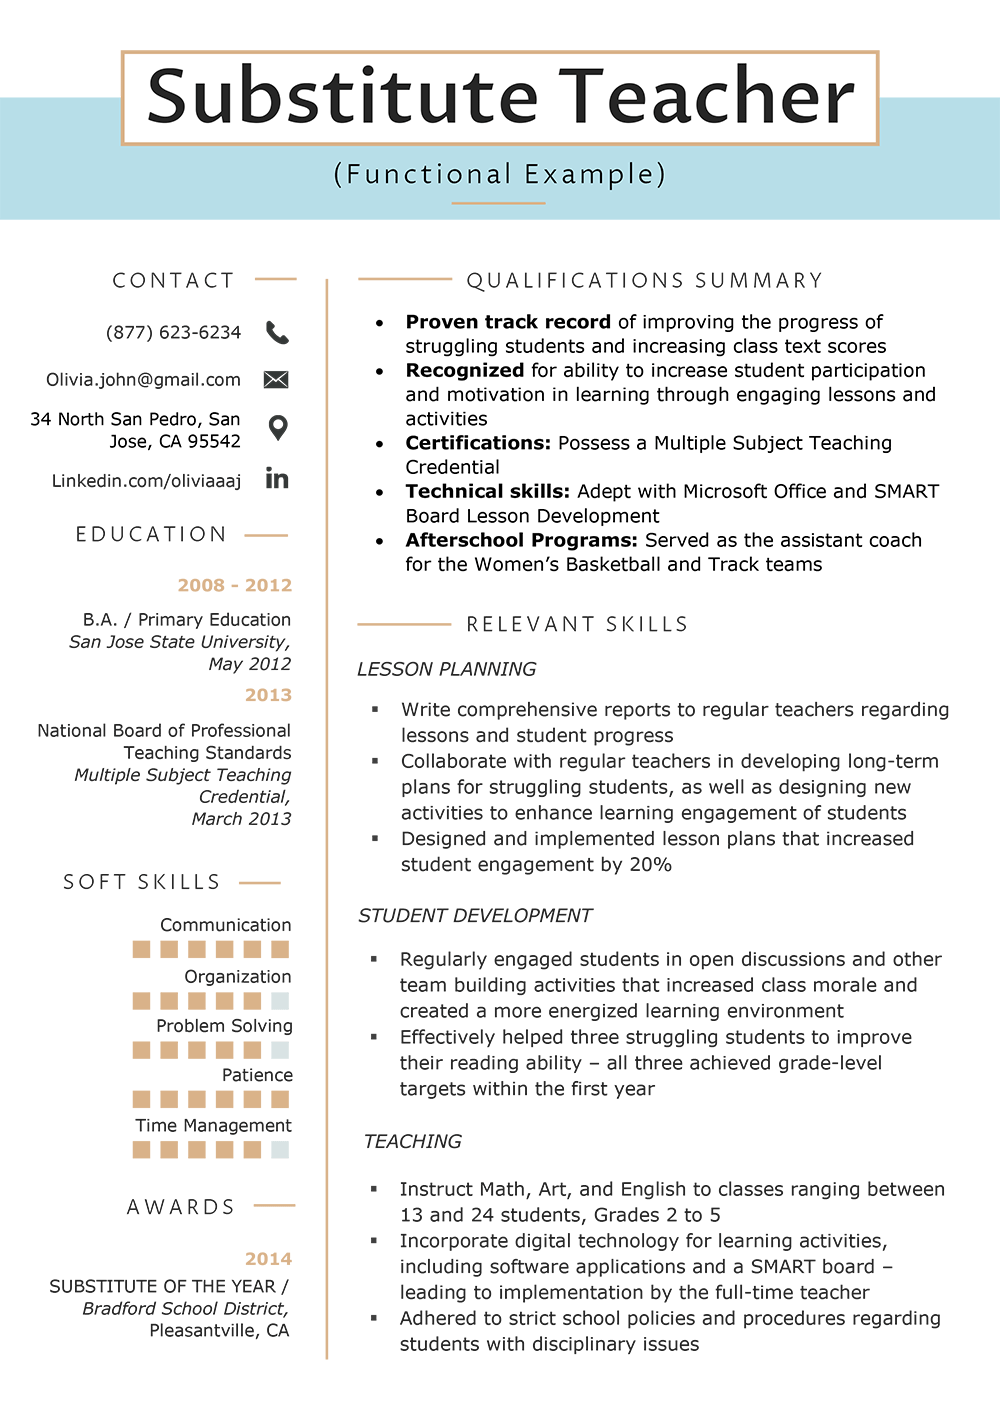 How To Write Resume Functional Substitute Teacher Resume Sample how to write resume|wikiresume.com